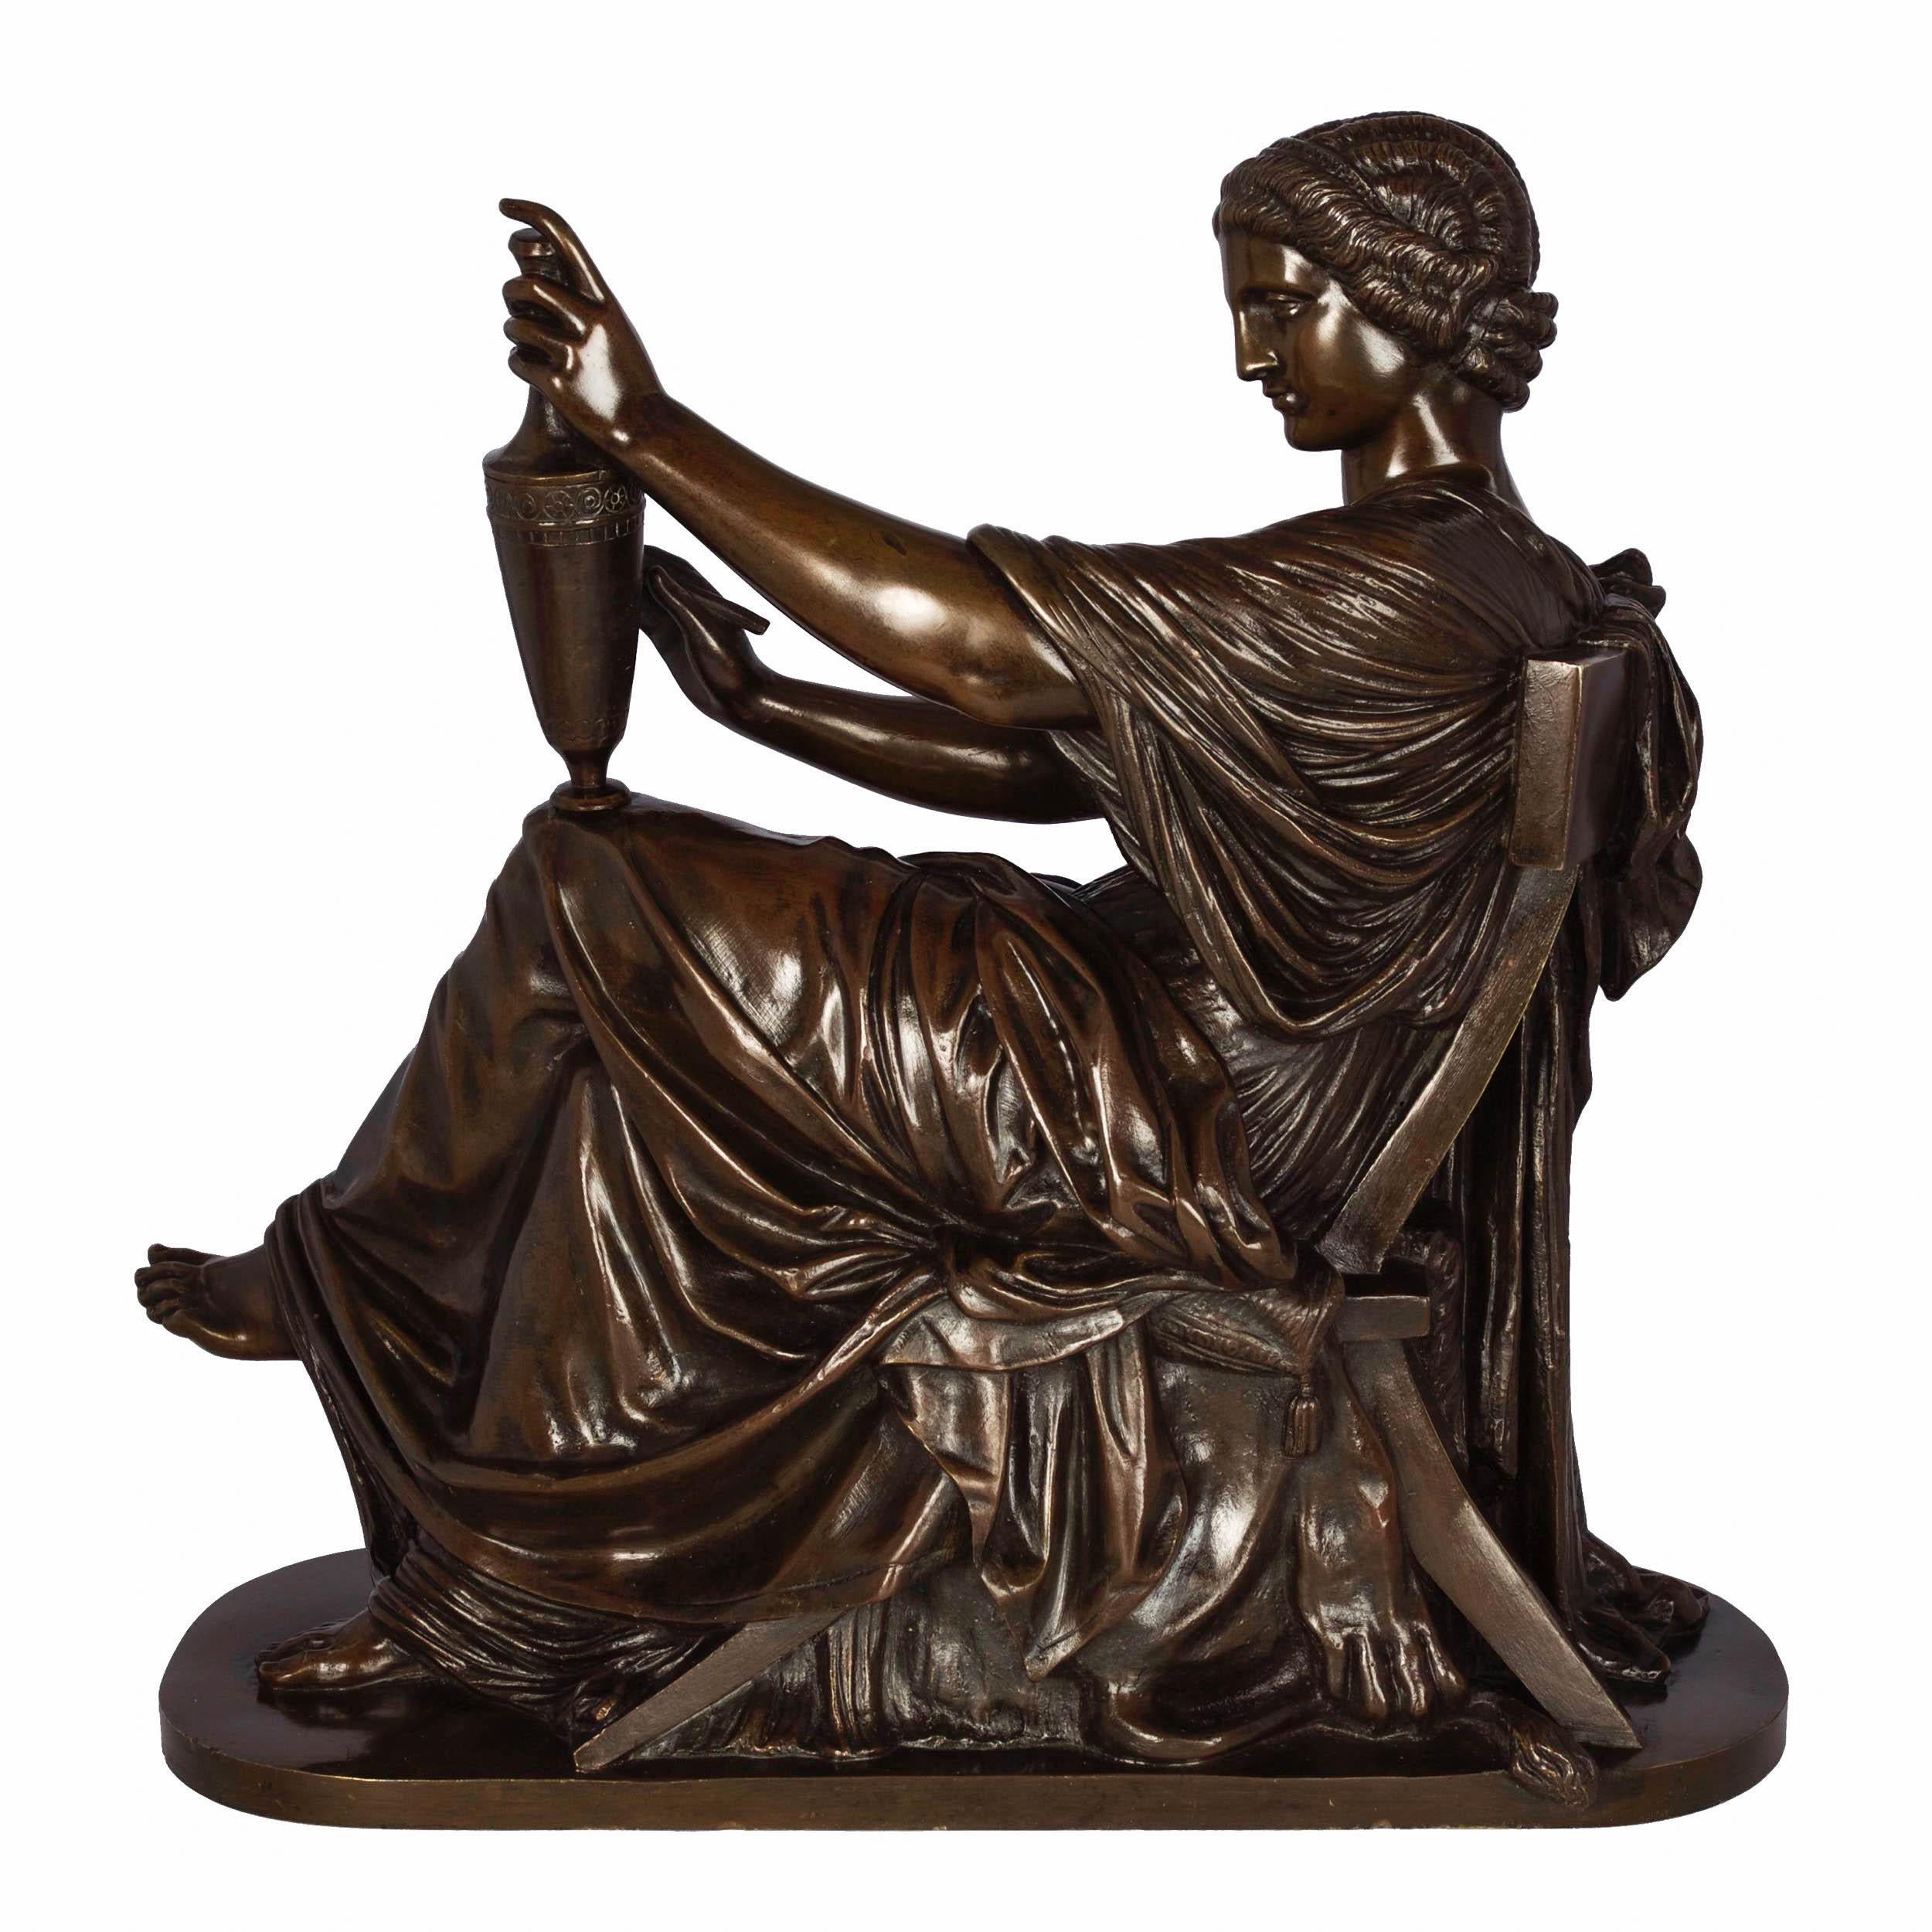 Originally exhibited in plaster at the Salon of 1857 (no. 3102), it was again exhibited at the Salon of 1861 (no. 3616) in marble with the title L'Art Étrusque. It was acquired by the French government for 7,000 francs and was subsequently placed in